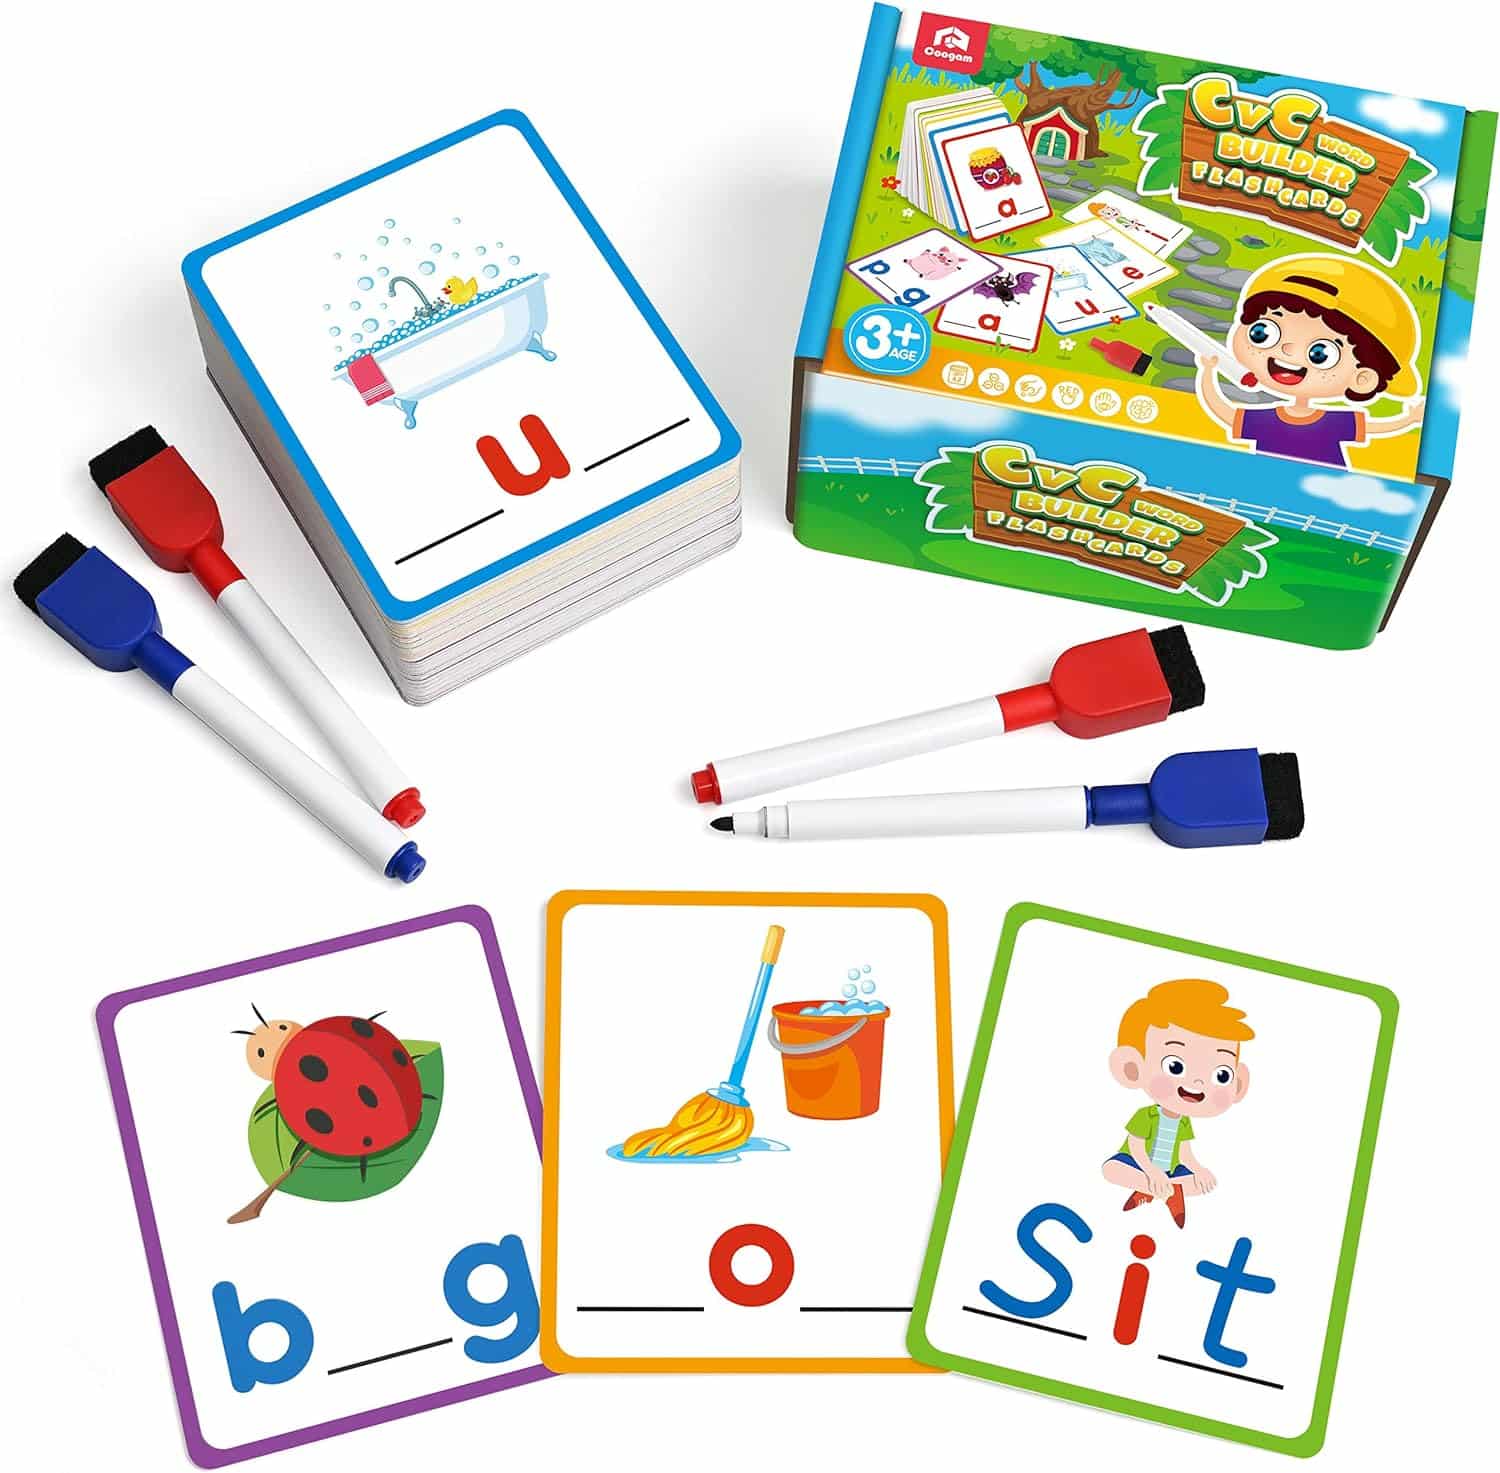 Coogam Short Vowel Spelling Flashcards: A Comprehensive Review of the Ideal Educational Toy for Early Readers